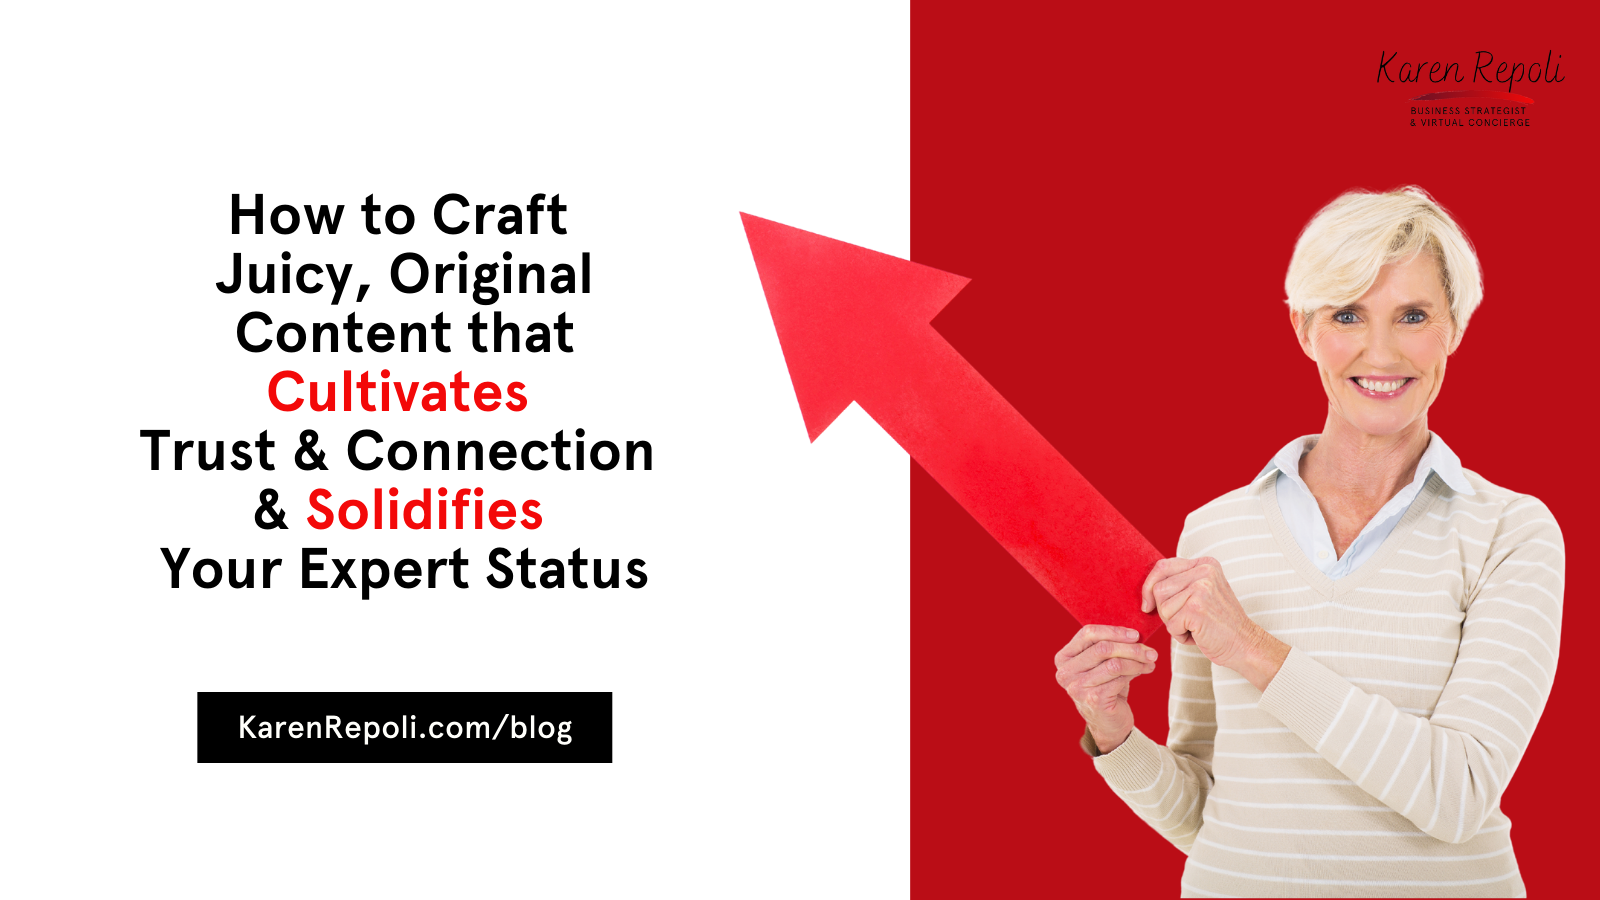 How to Craft Content that Cultivates Trust & Connection & Solidifies your Expert Status